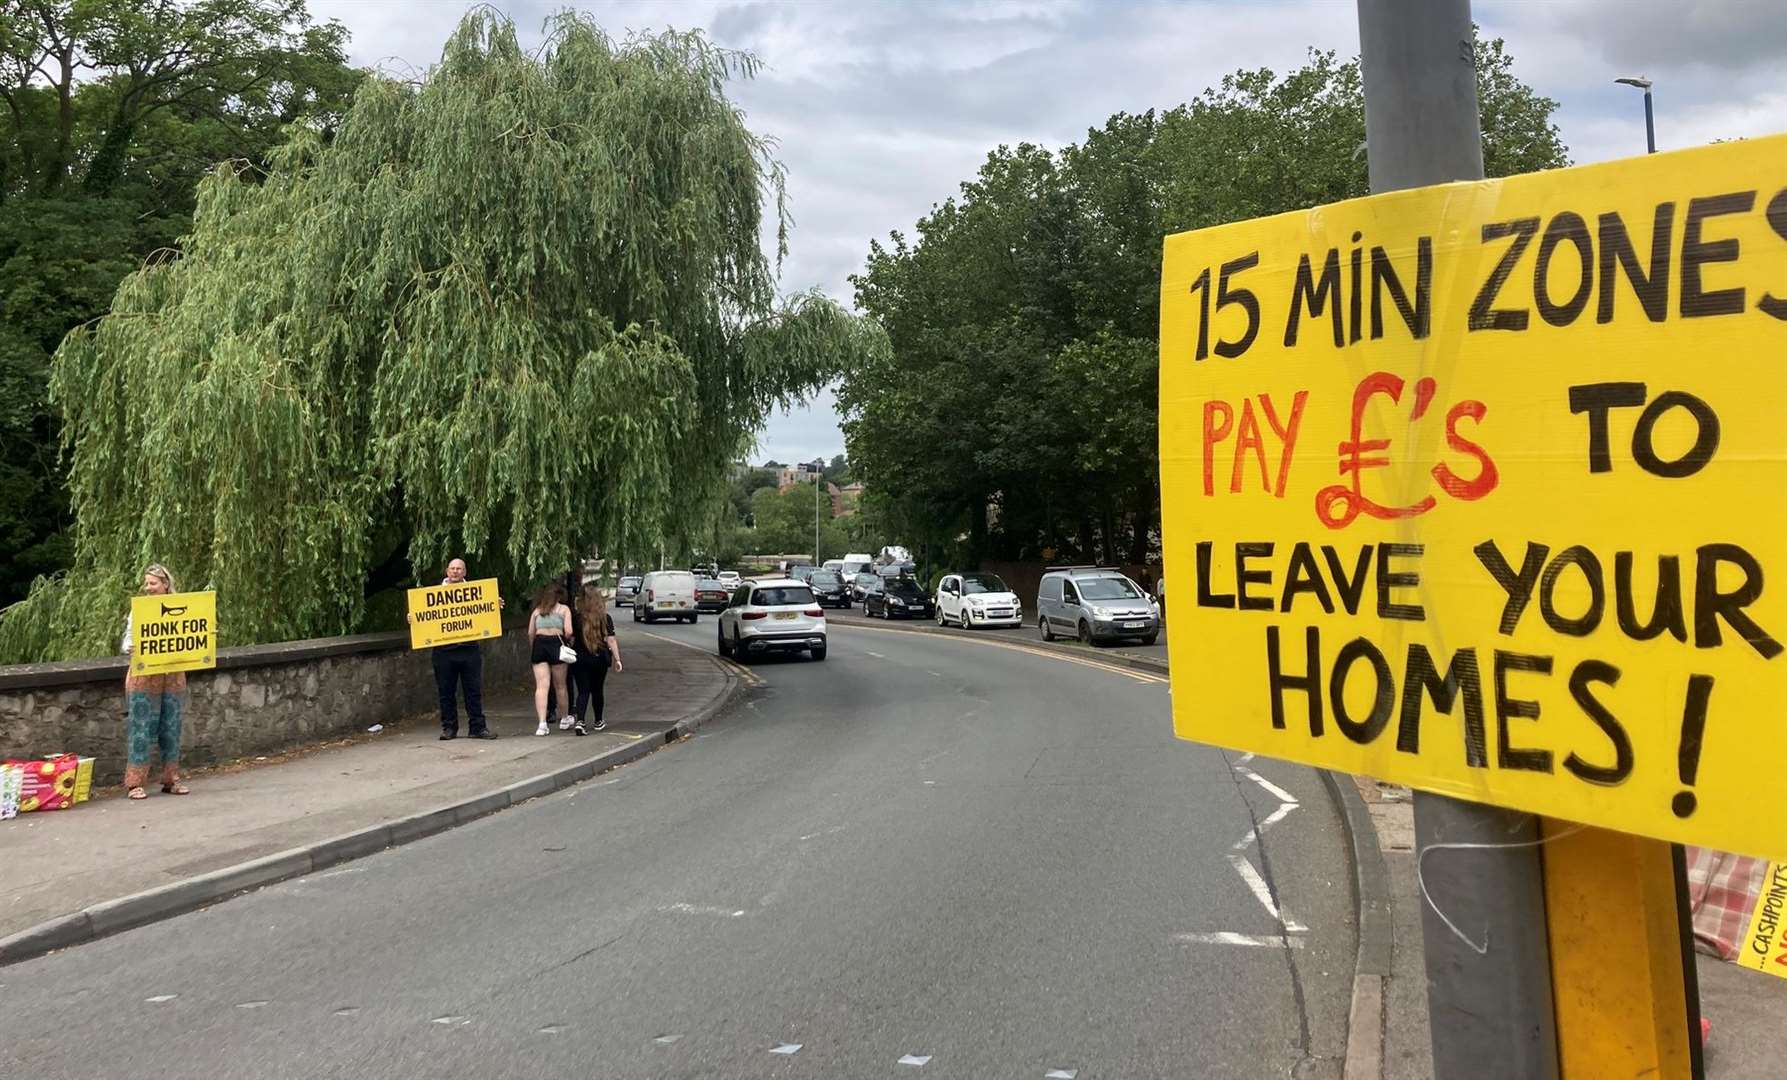 Rebels on Roundabouts wave their yellow boards during a protest in Maidstone